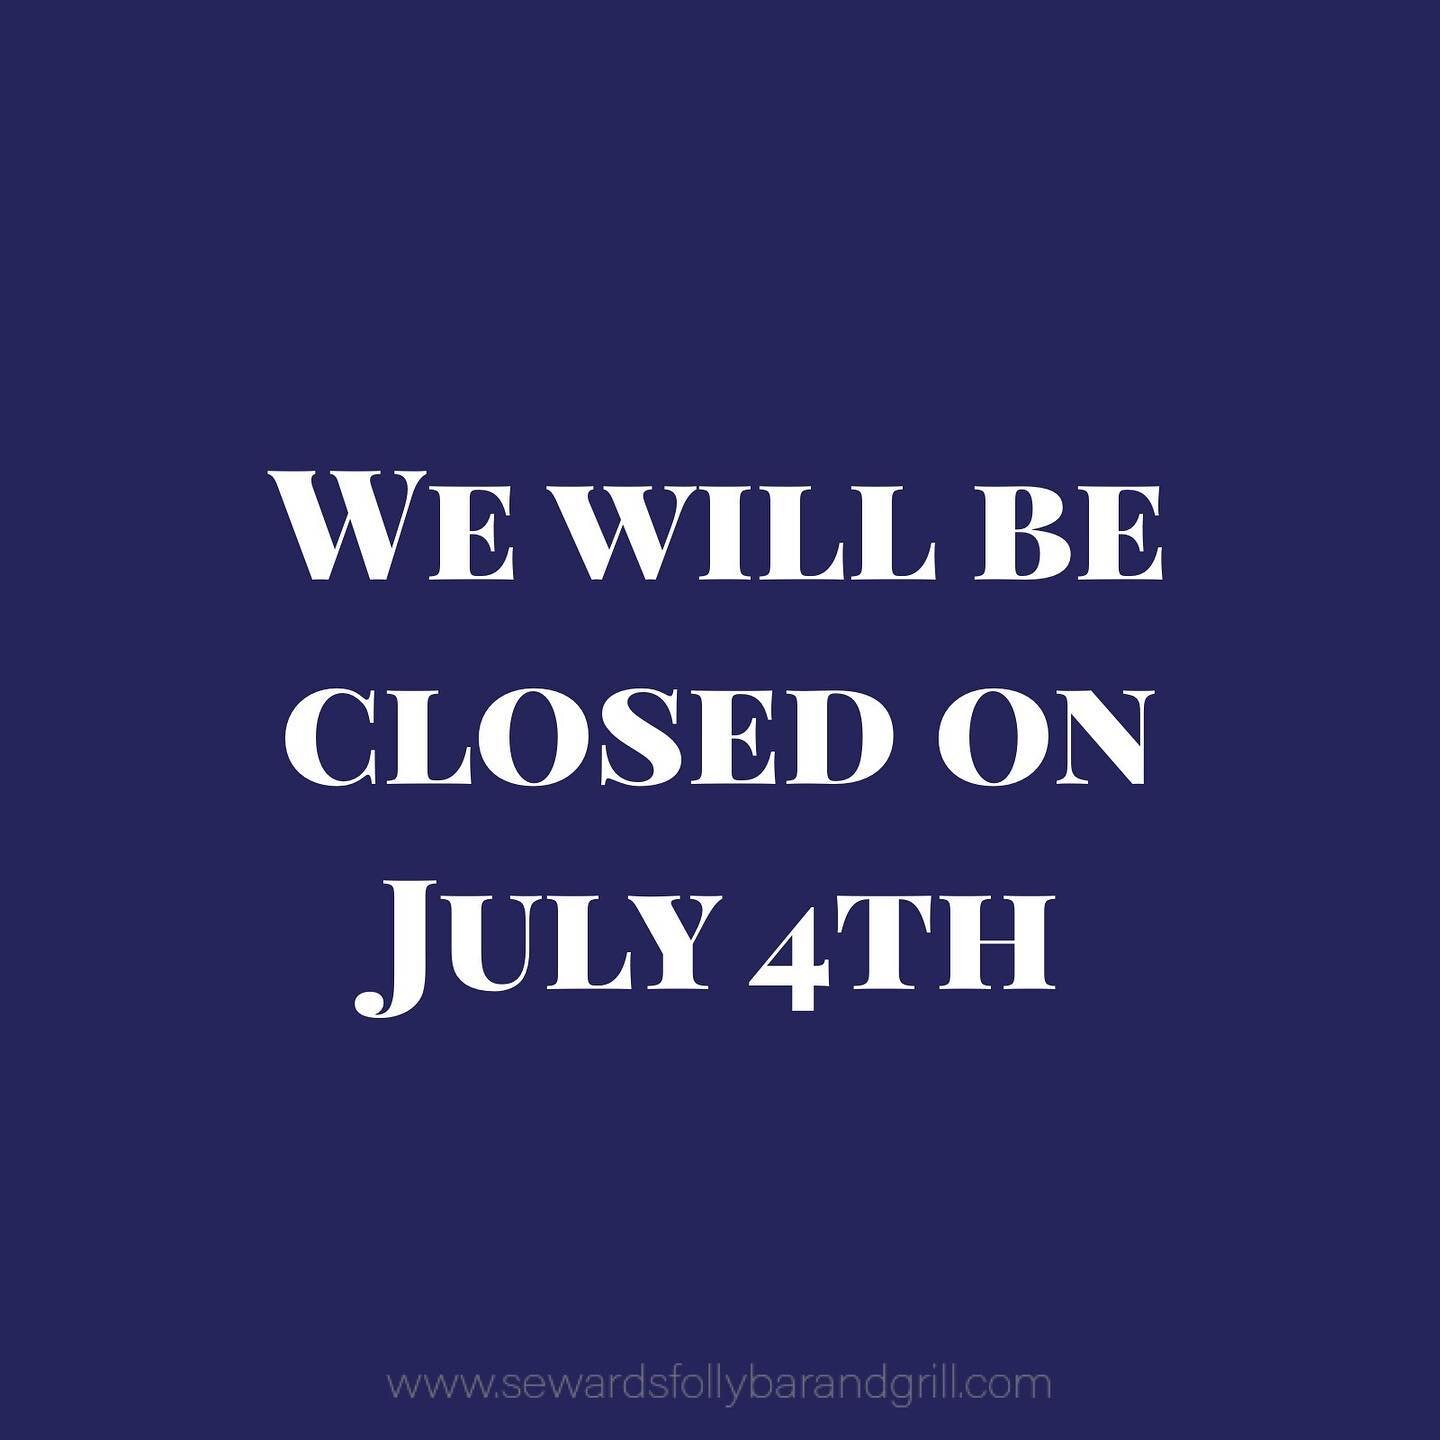 Just a heads up! We will be closed for the holiday and spending time with our families. We hope you are able to do the same! ❤️🤍💙